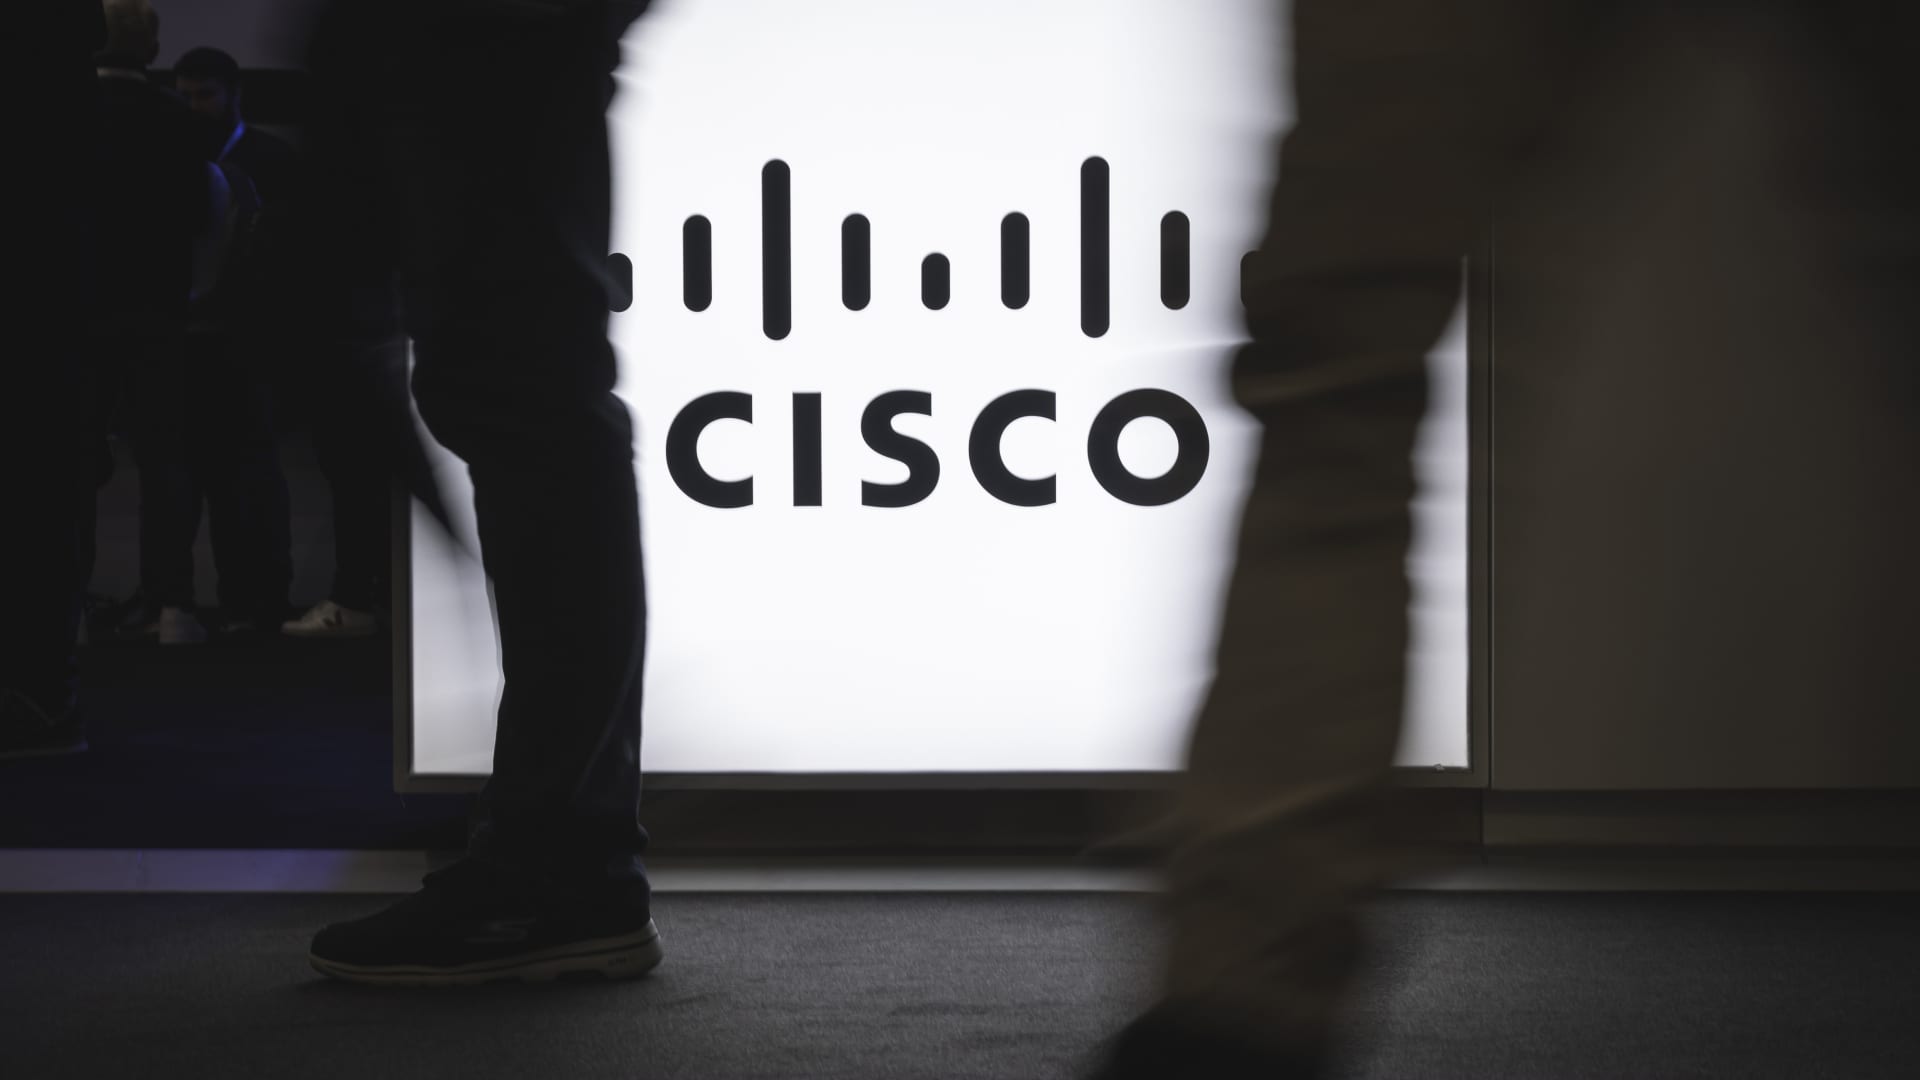 Cisco to cut thousands of jobs as it seeks to focus on high growth areas: Reuters